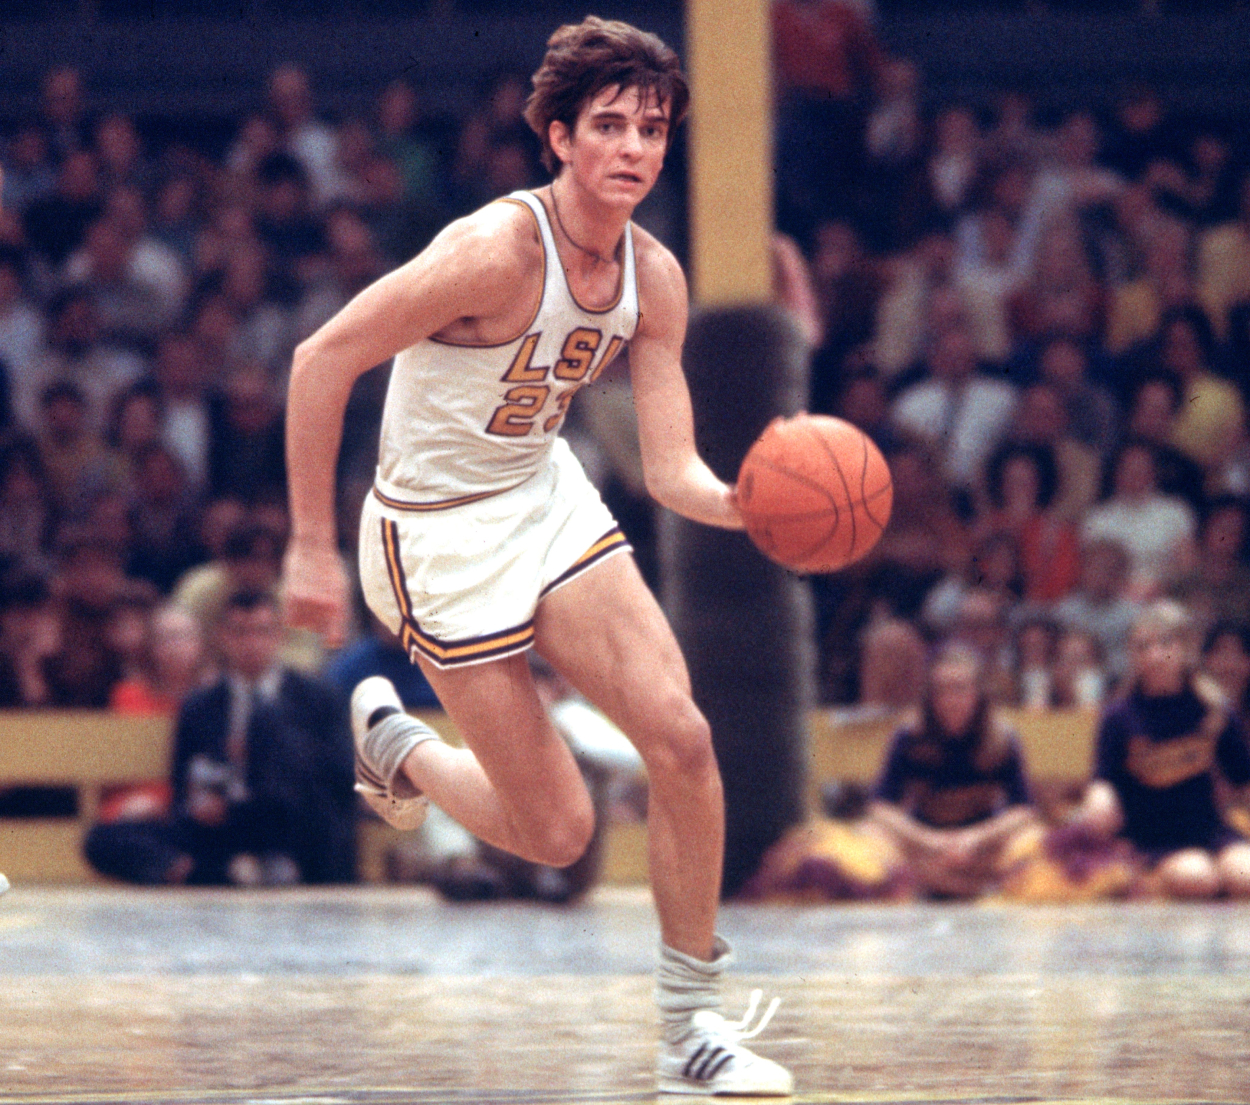 Pete Maravich of the LSU Tigers dribbles the ball.